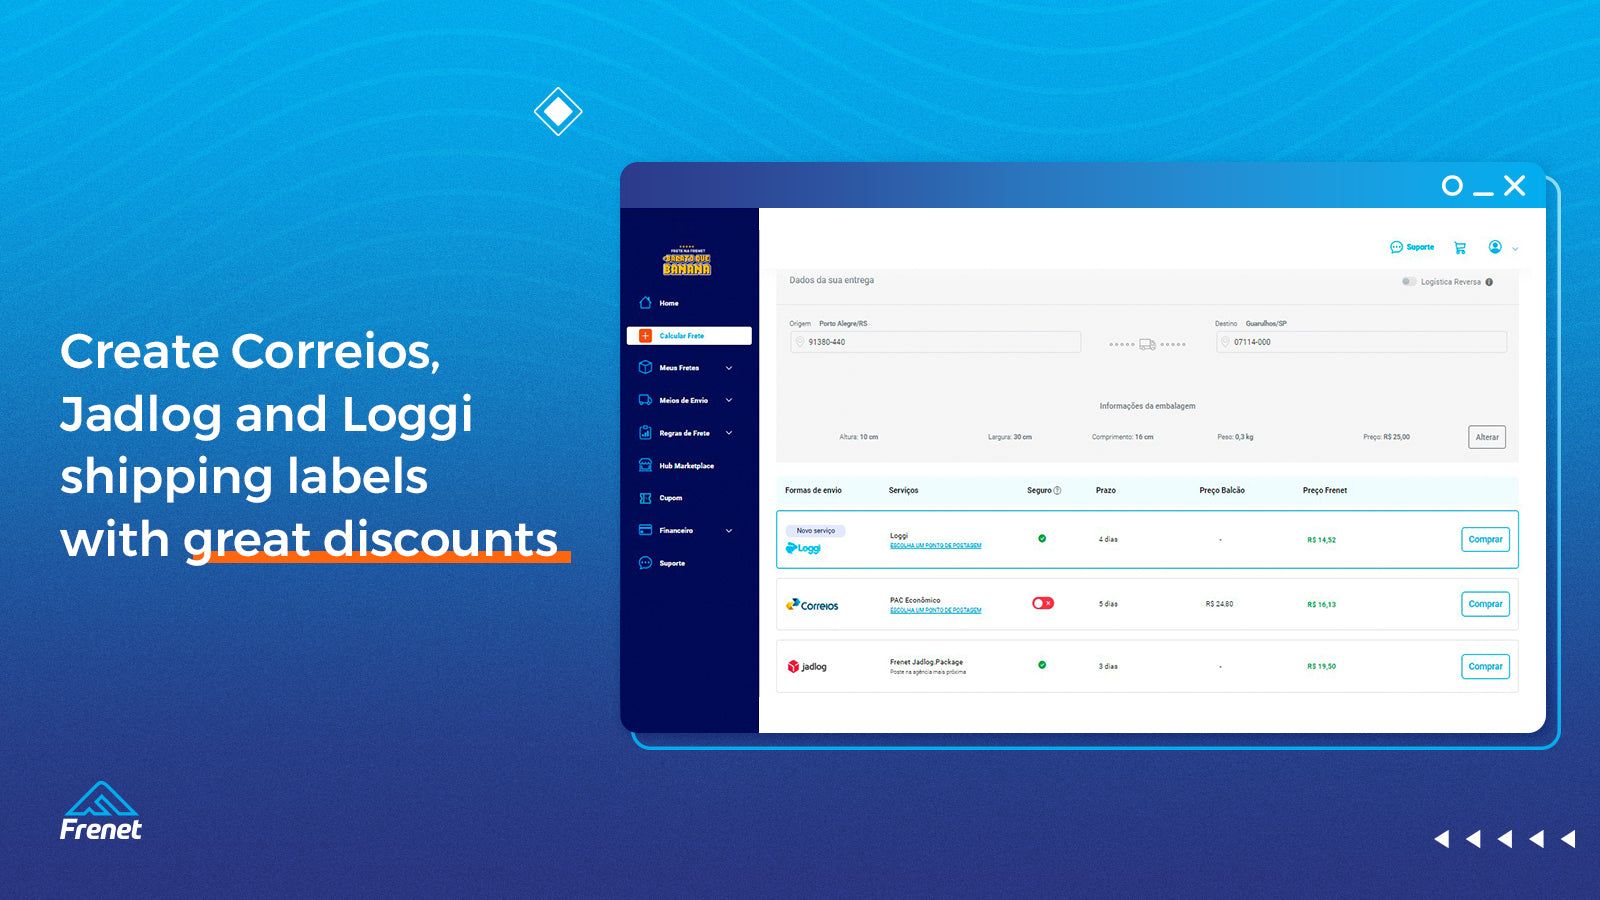 Send Correios, Jadlog and Loggi shipping labels with discounts